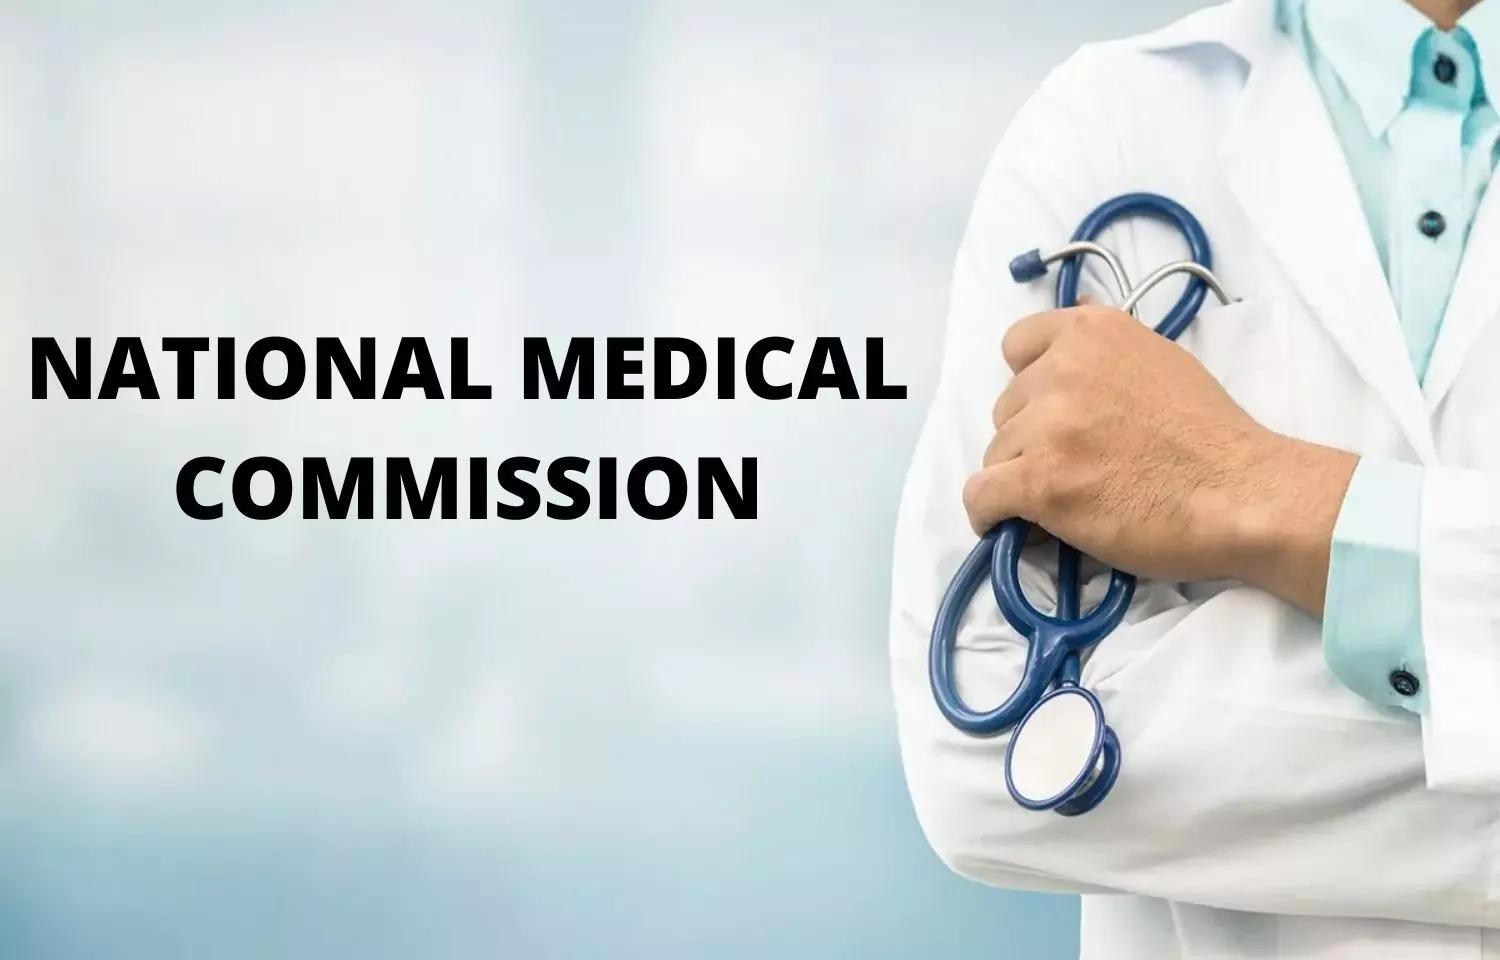 IPC 304 A: NMC frames Guidelines for Prosecution of Doctors in Criminal Negligence